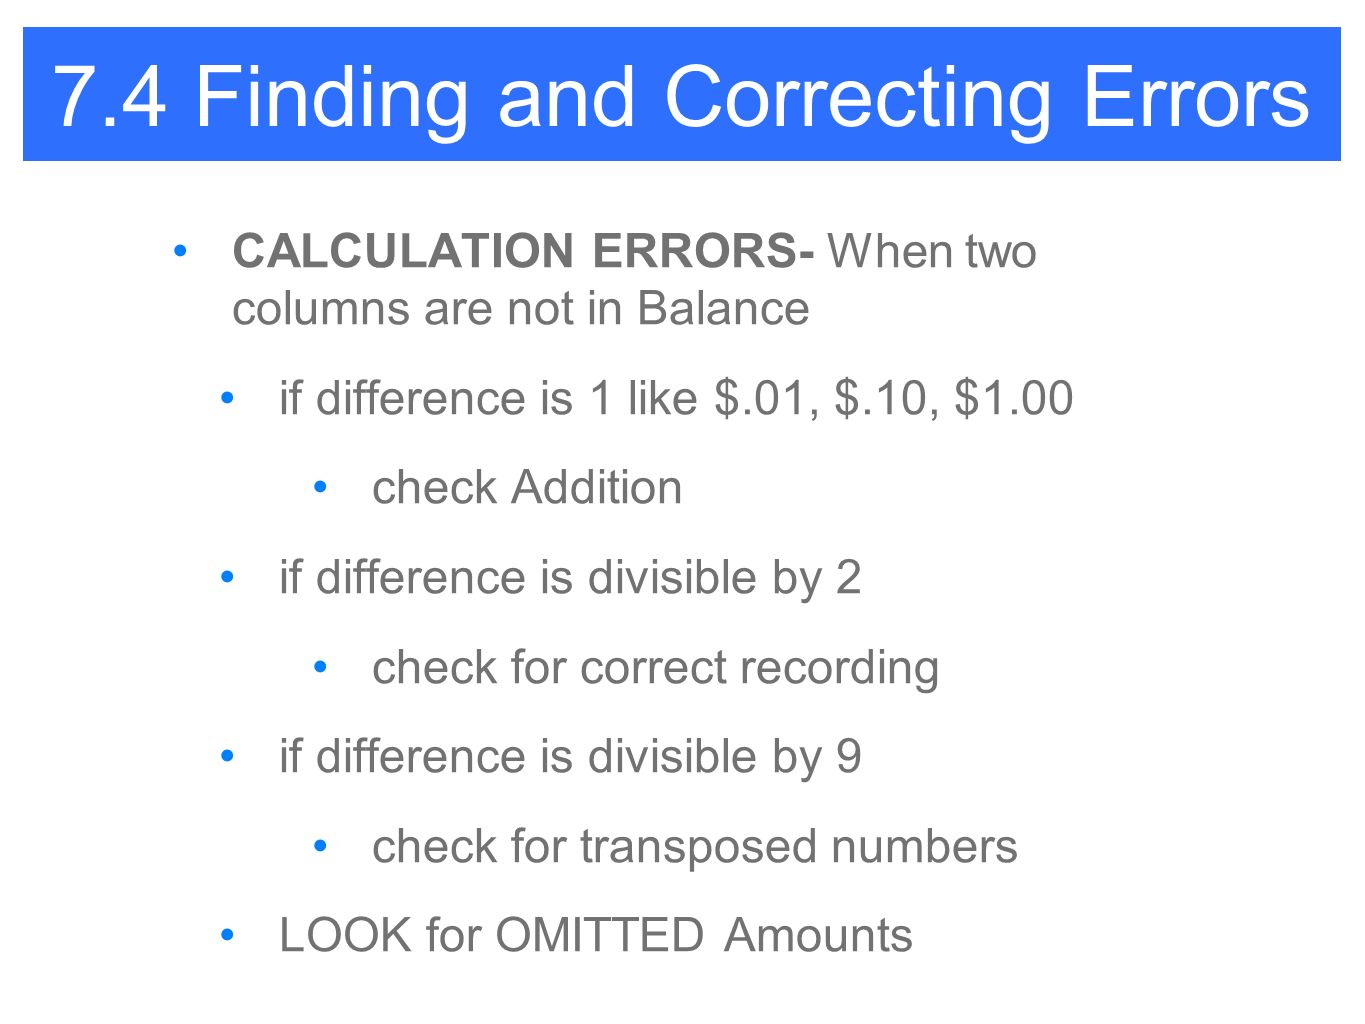 7.4 Finding and Correcting Errors